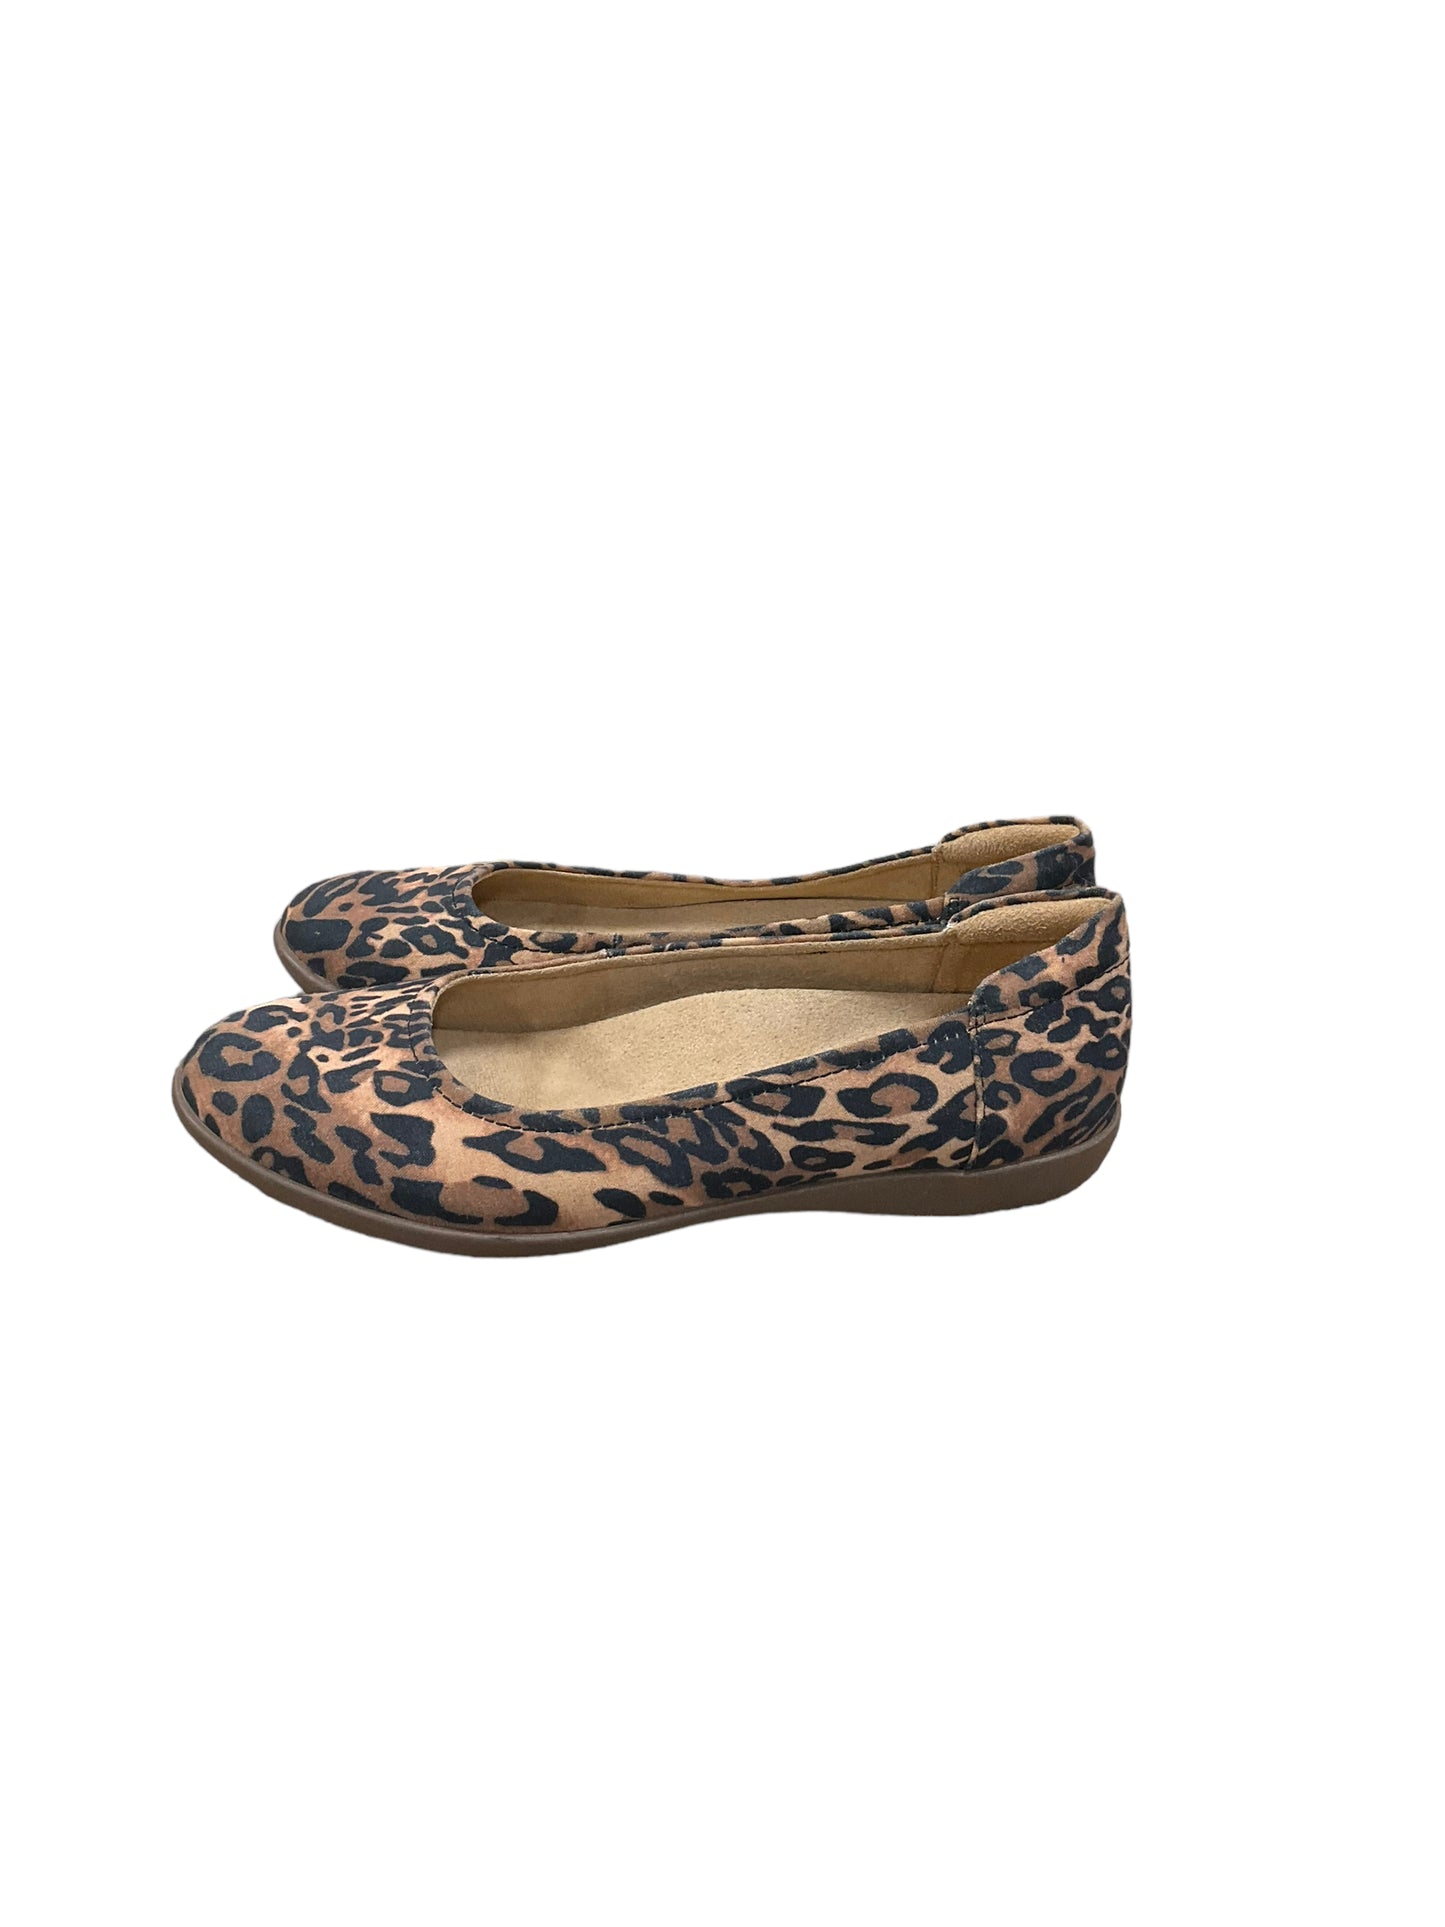 Shoes Flats Other By Naturalizer  Size: 6.5